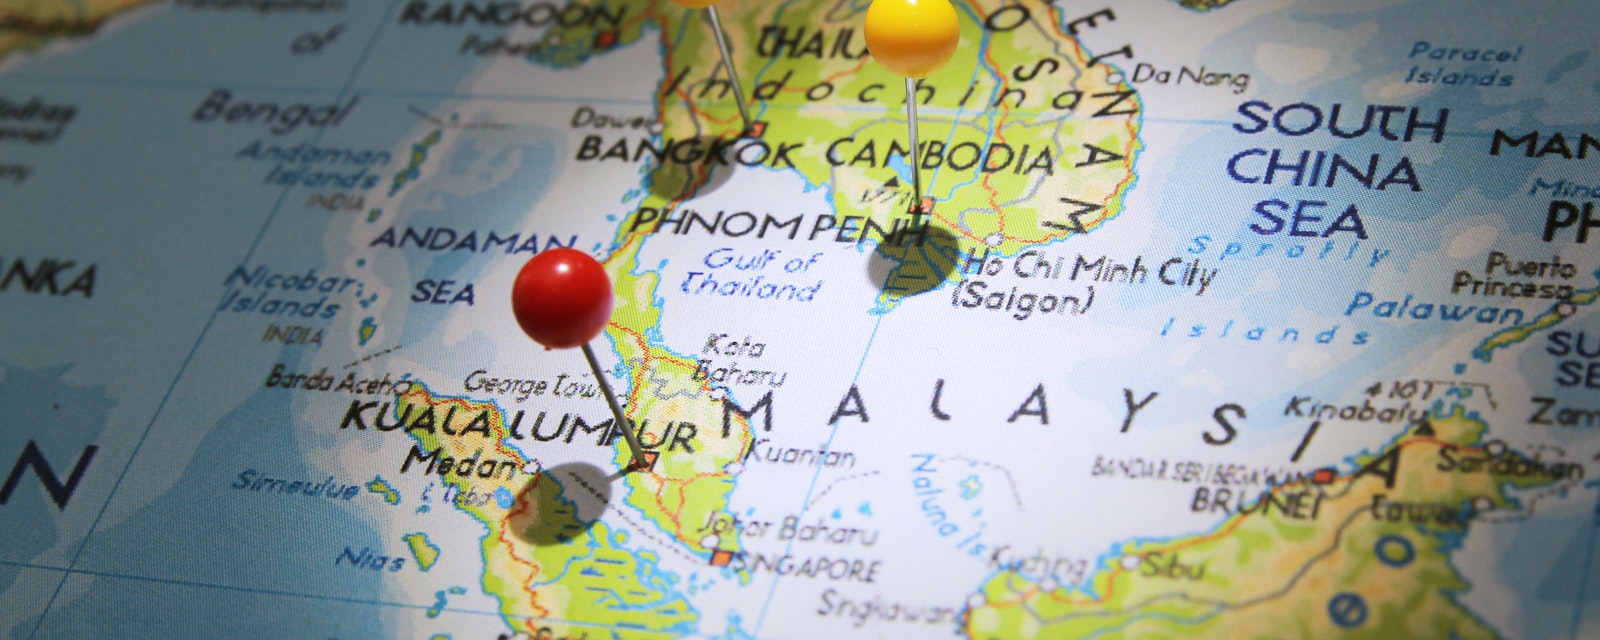 Southeast Asia map with pins